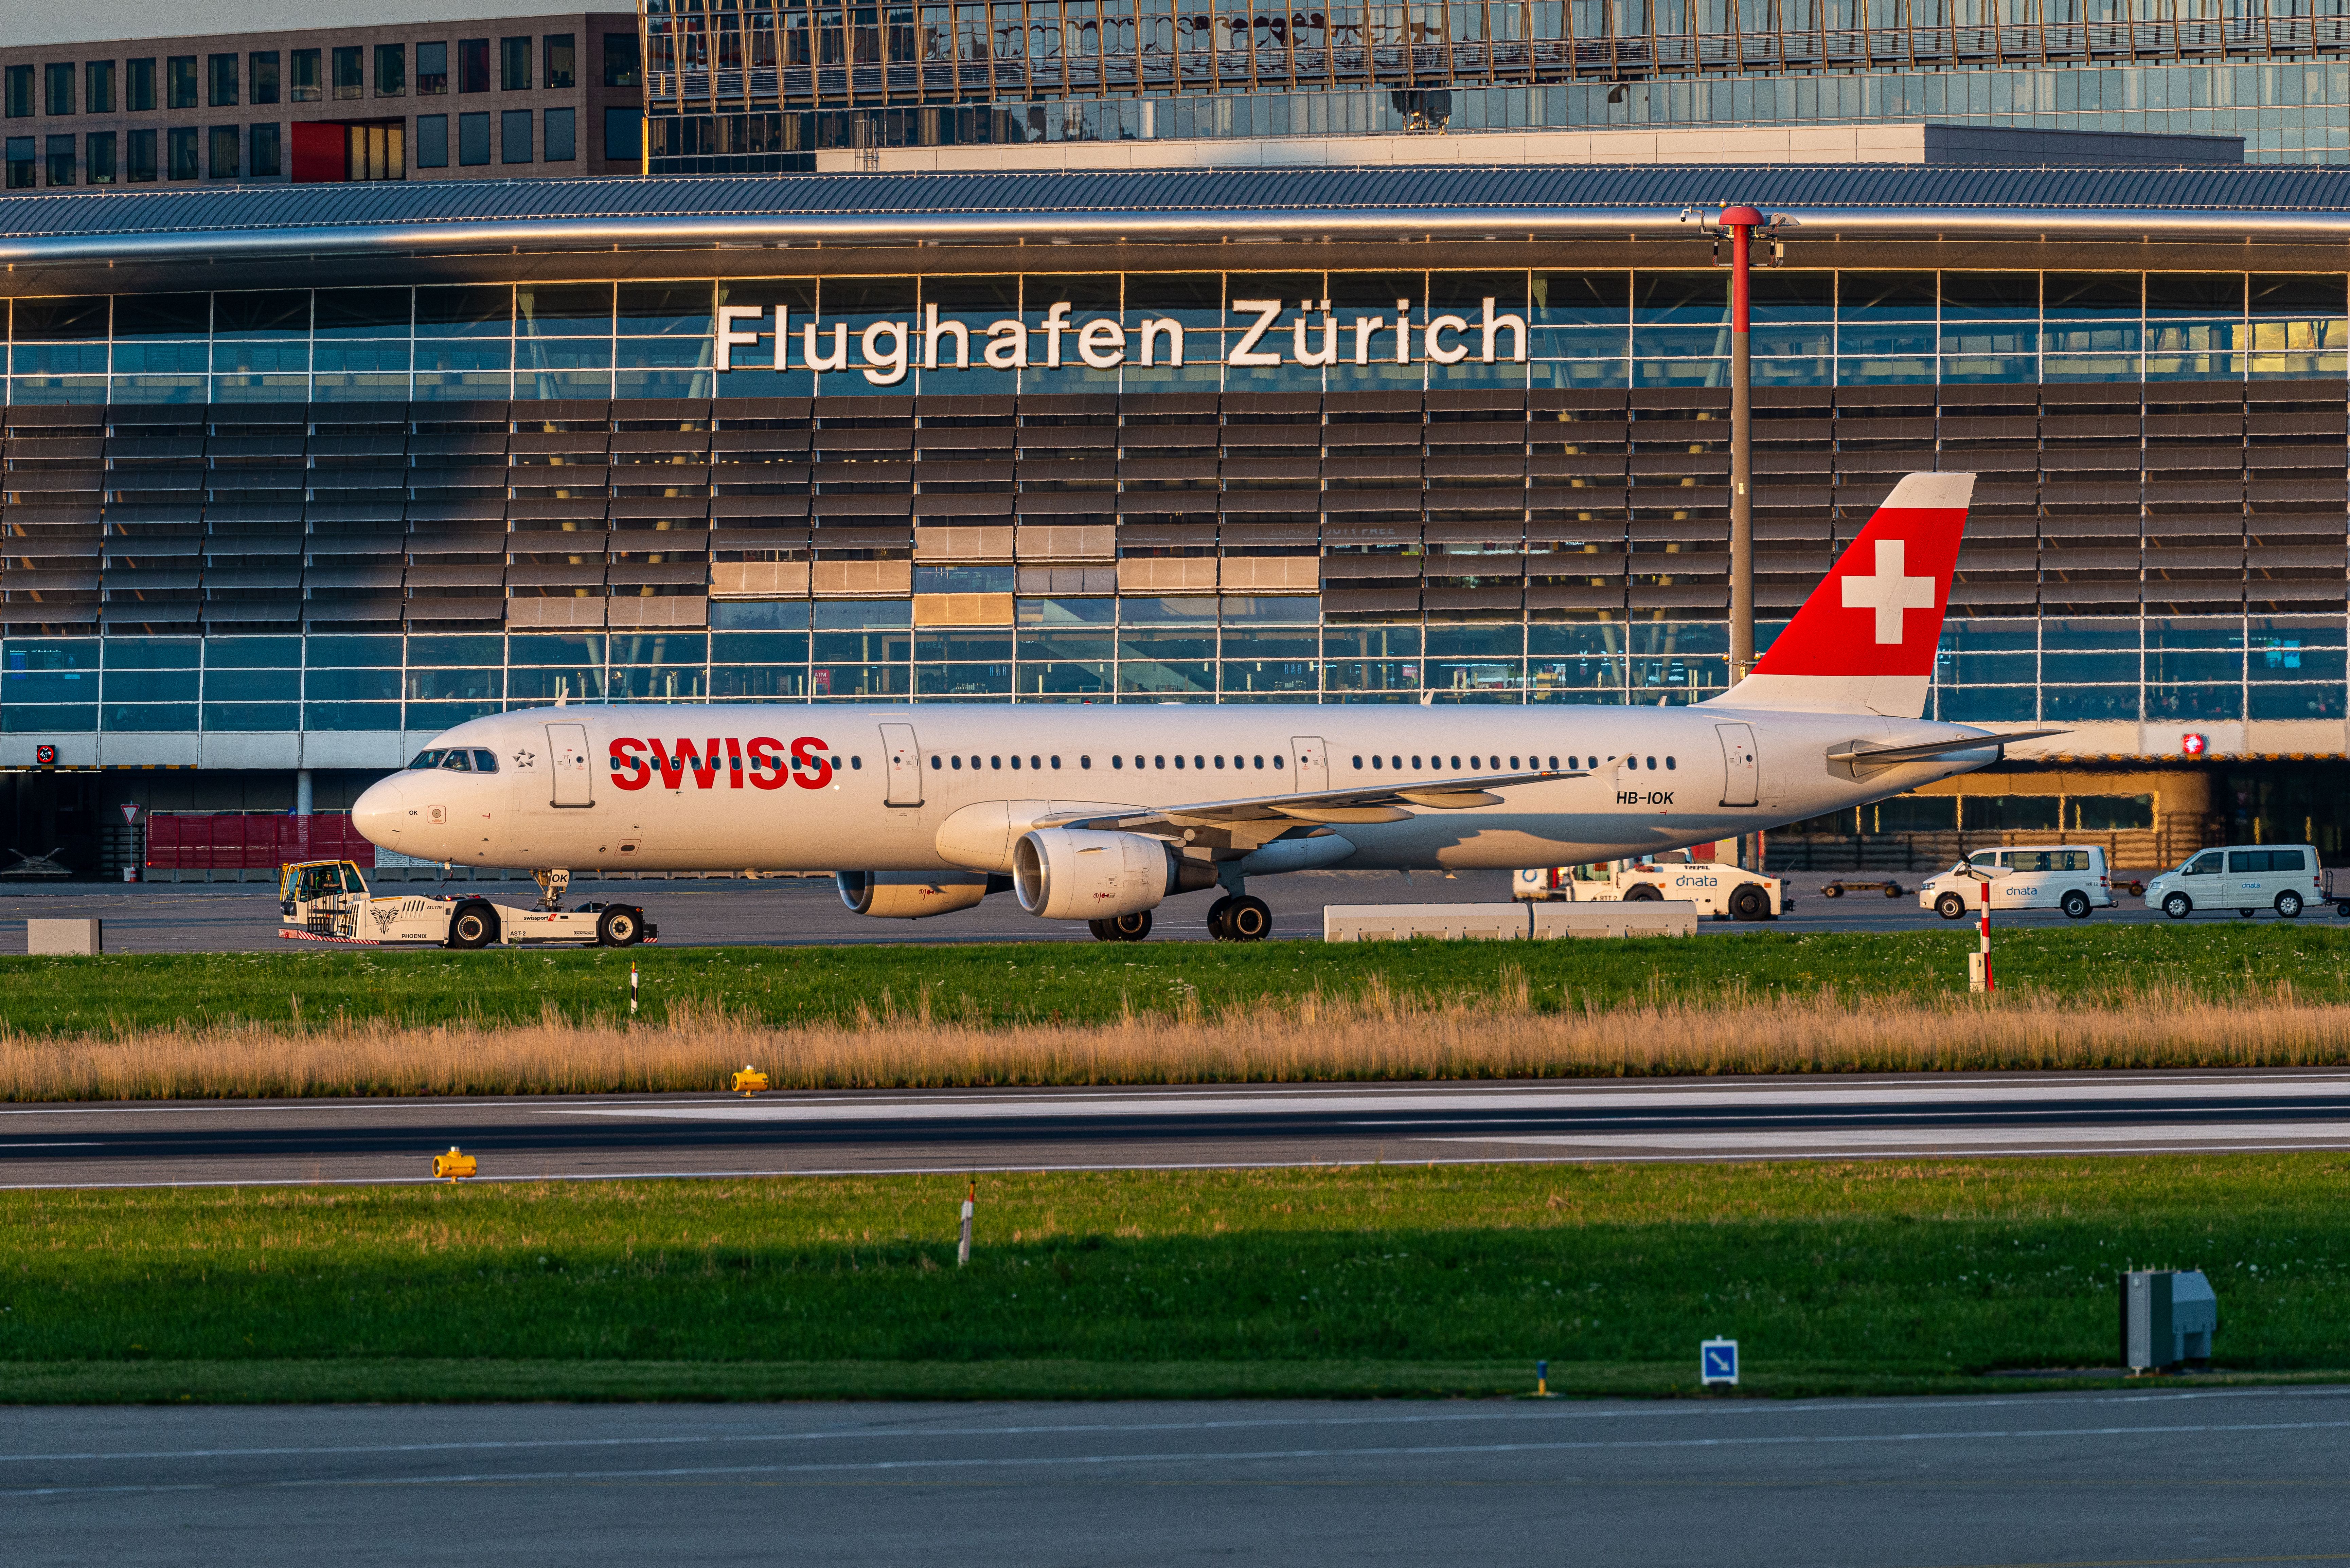 A SWISS plane in front of Zurich Airport